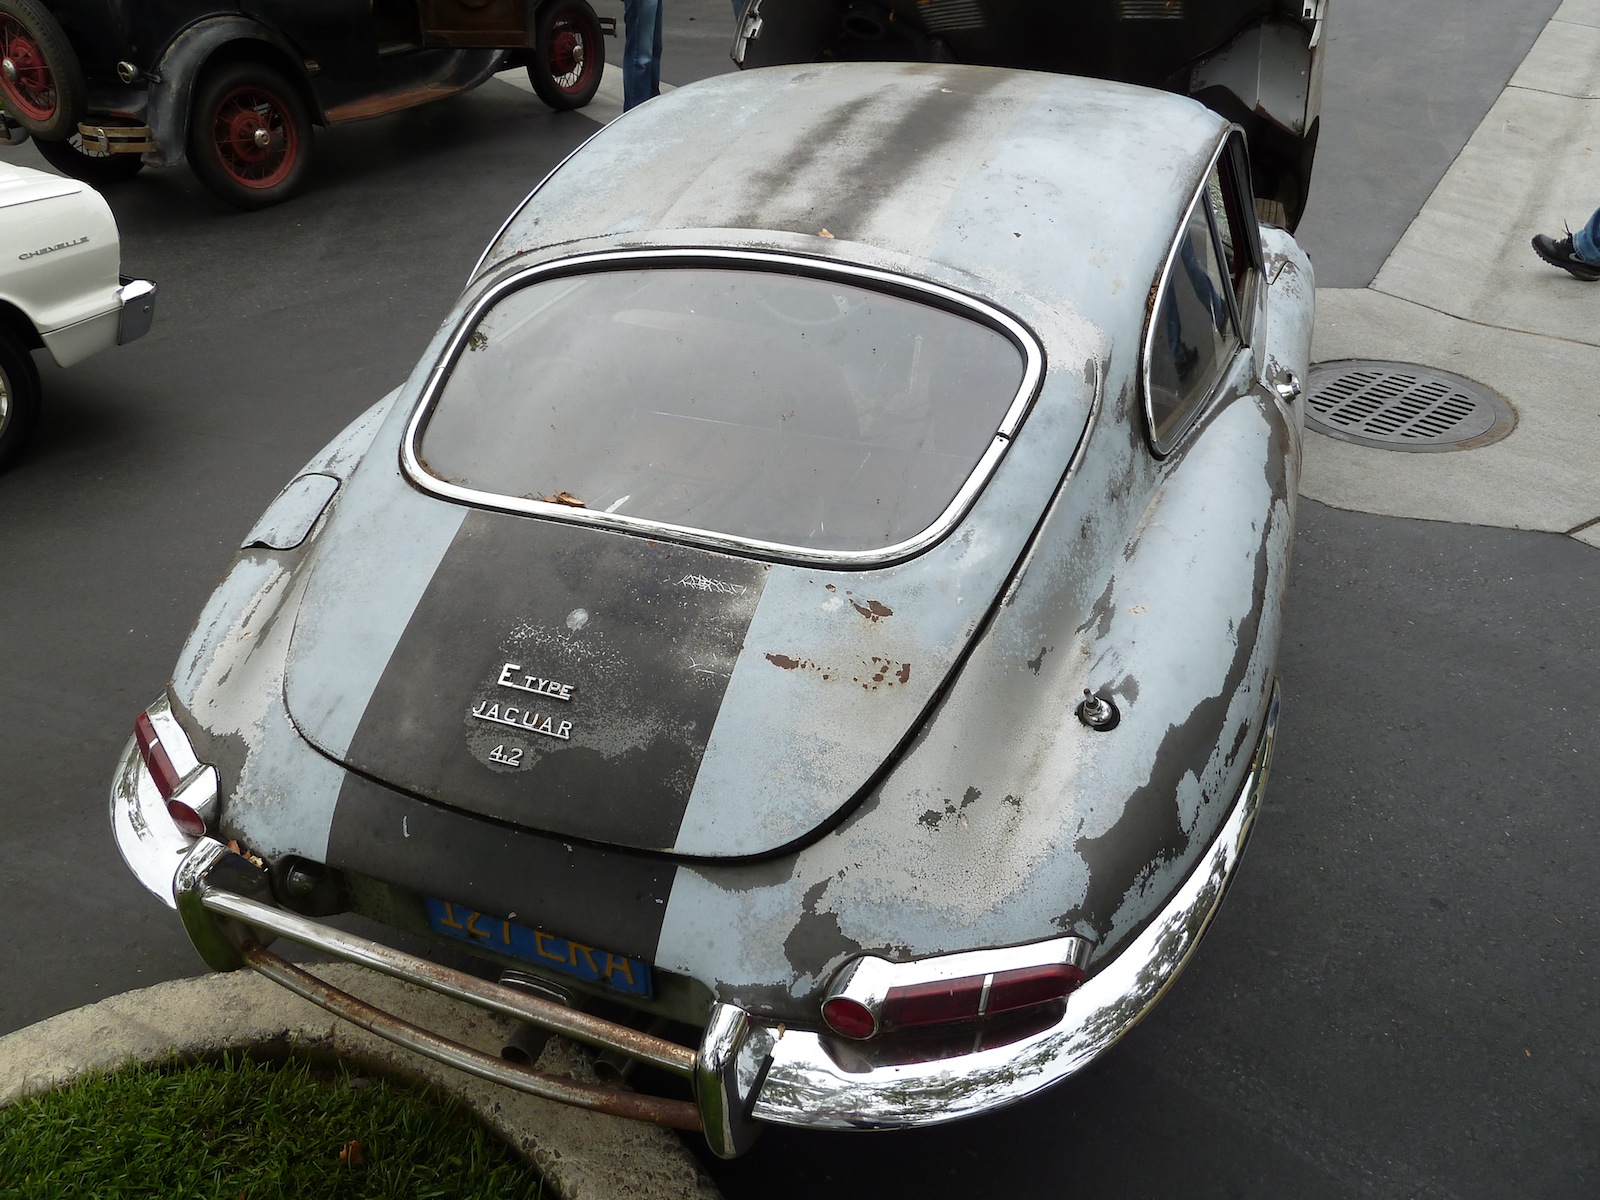 Extraordinary Popular Delusions and the Madness of Crowds - Dirt is Patina, Rust Is Desirable - The Barn Find Mania